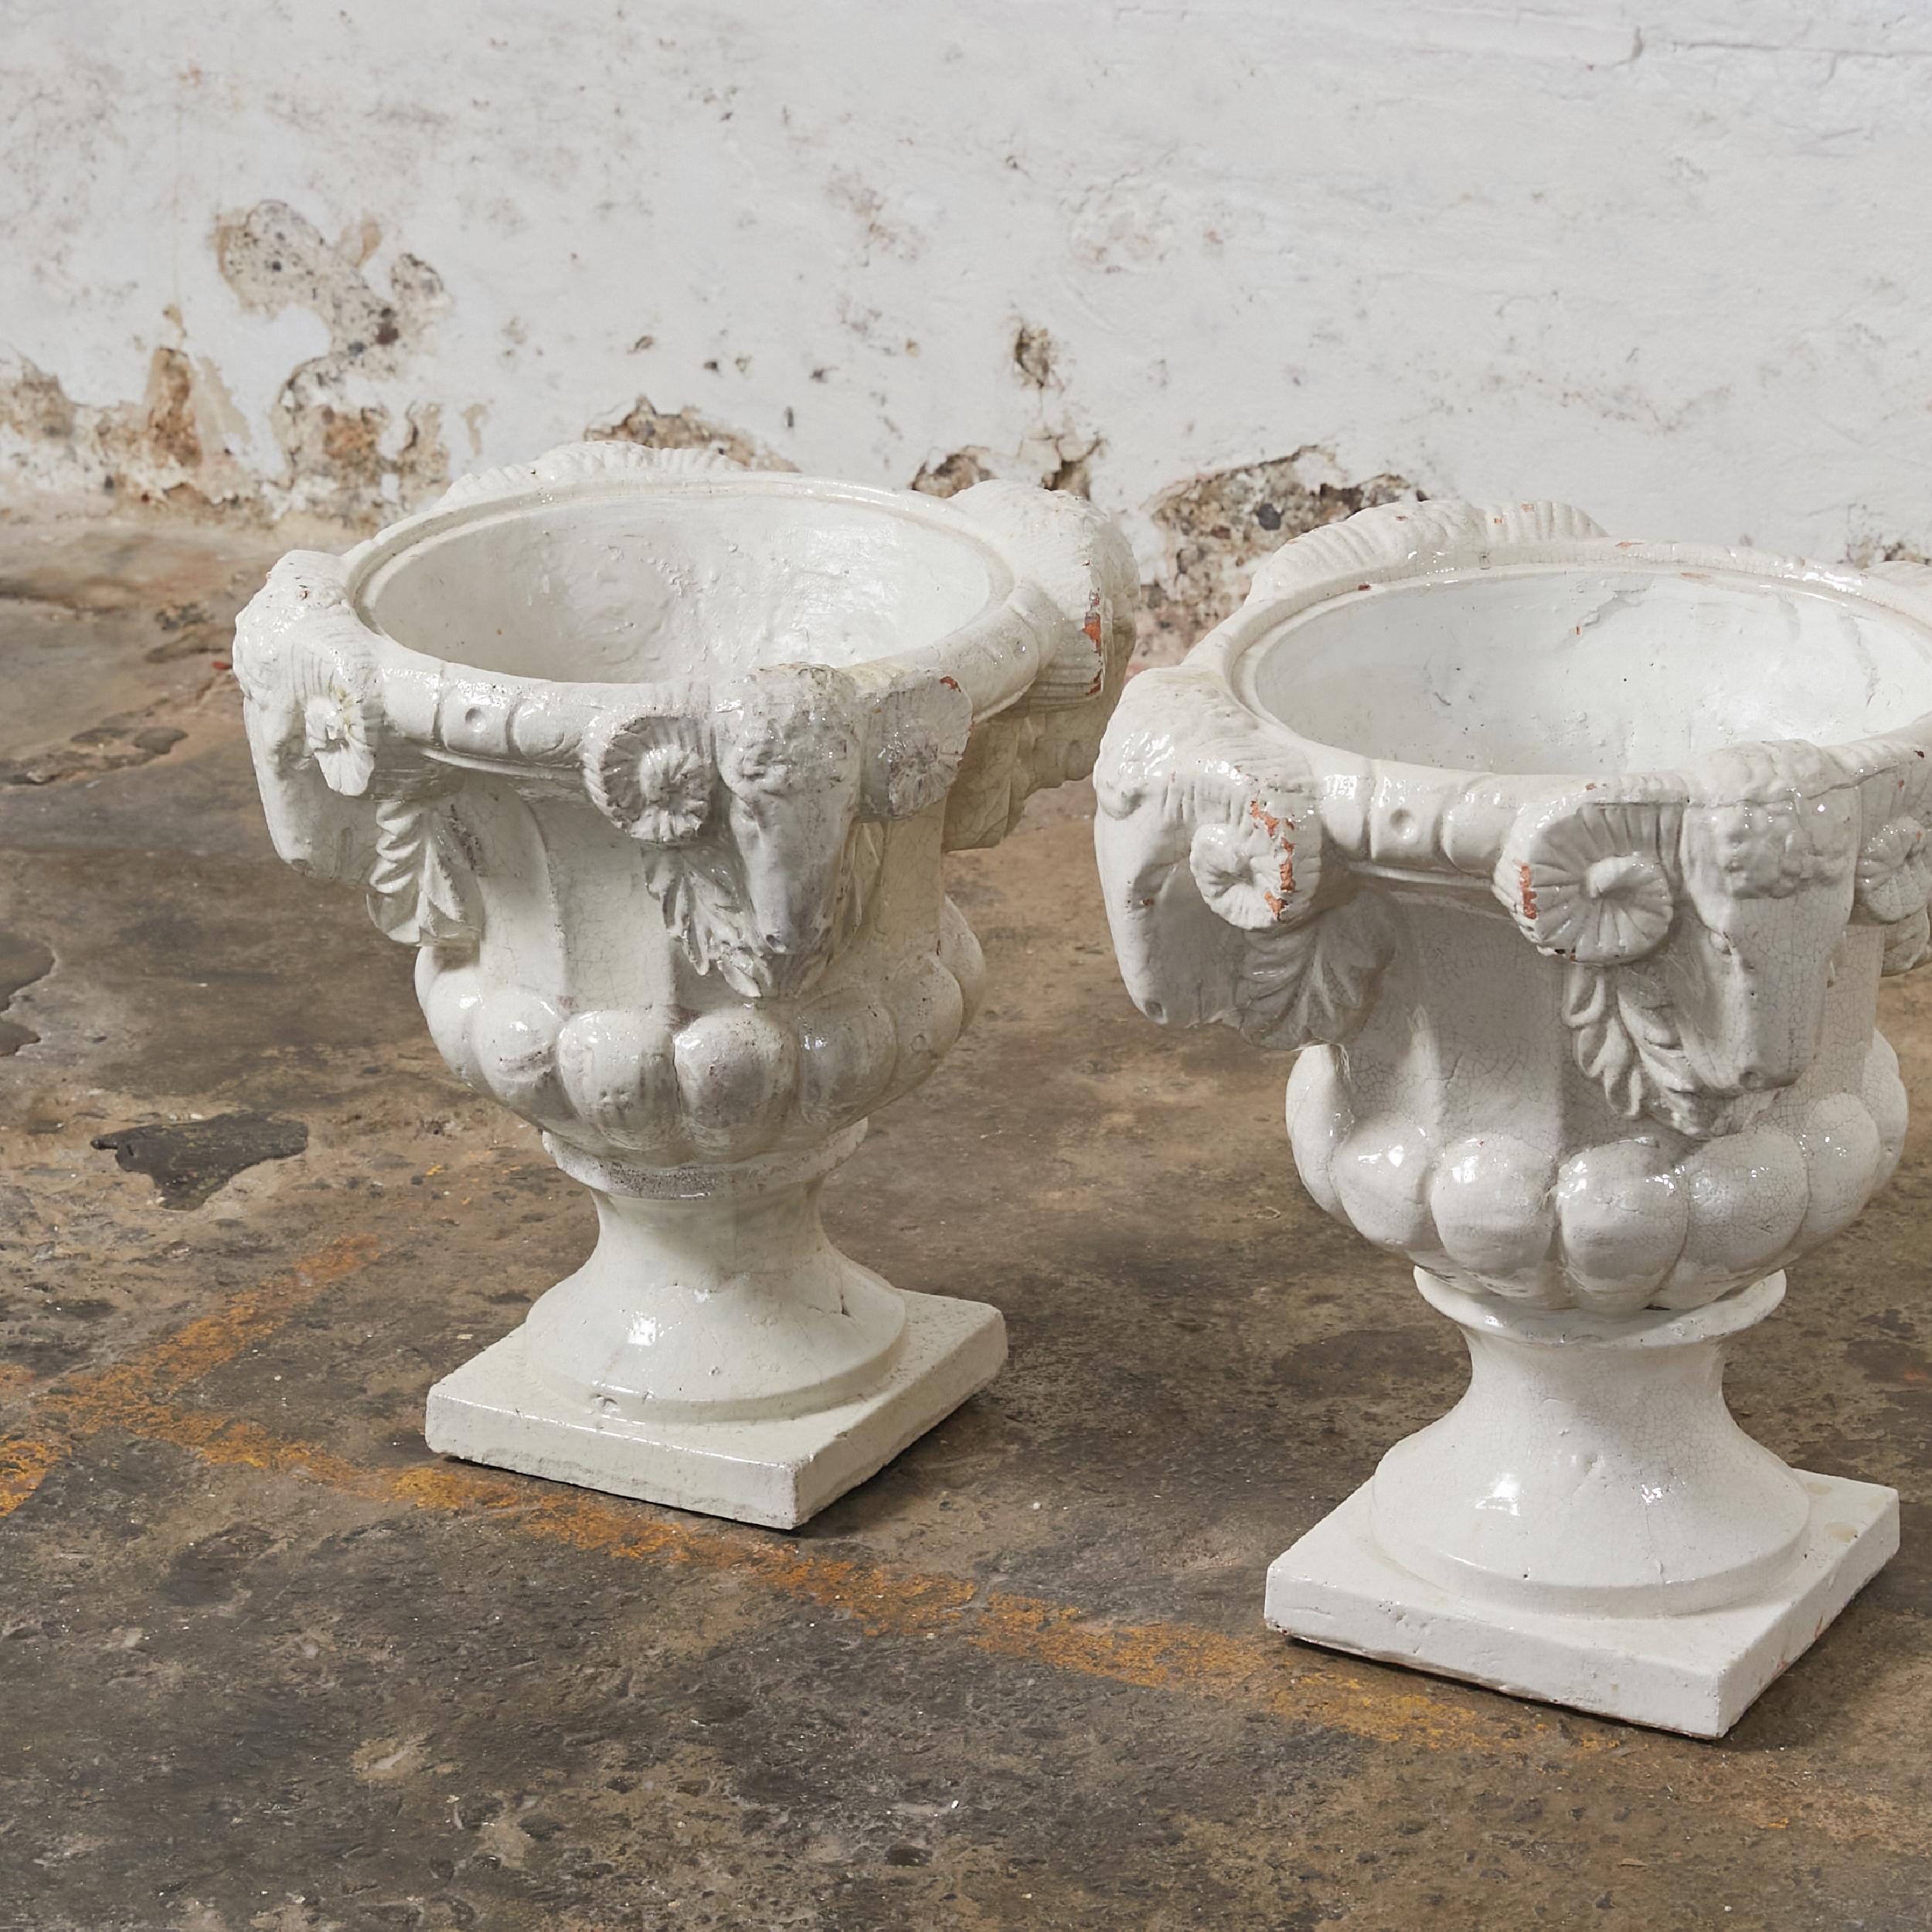 Ceramic Set of Two Dutch Terracota Planters with White Crackled Glaze